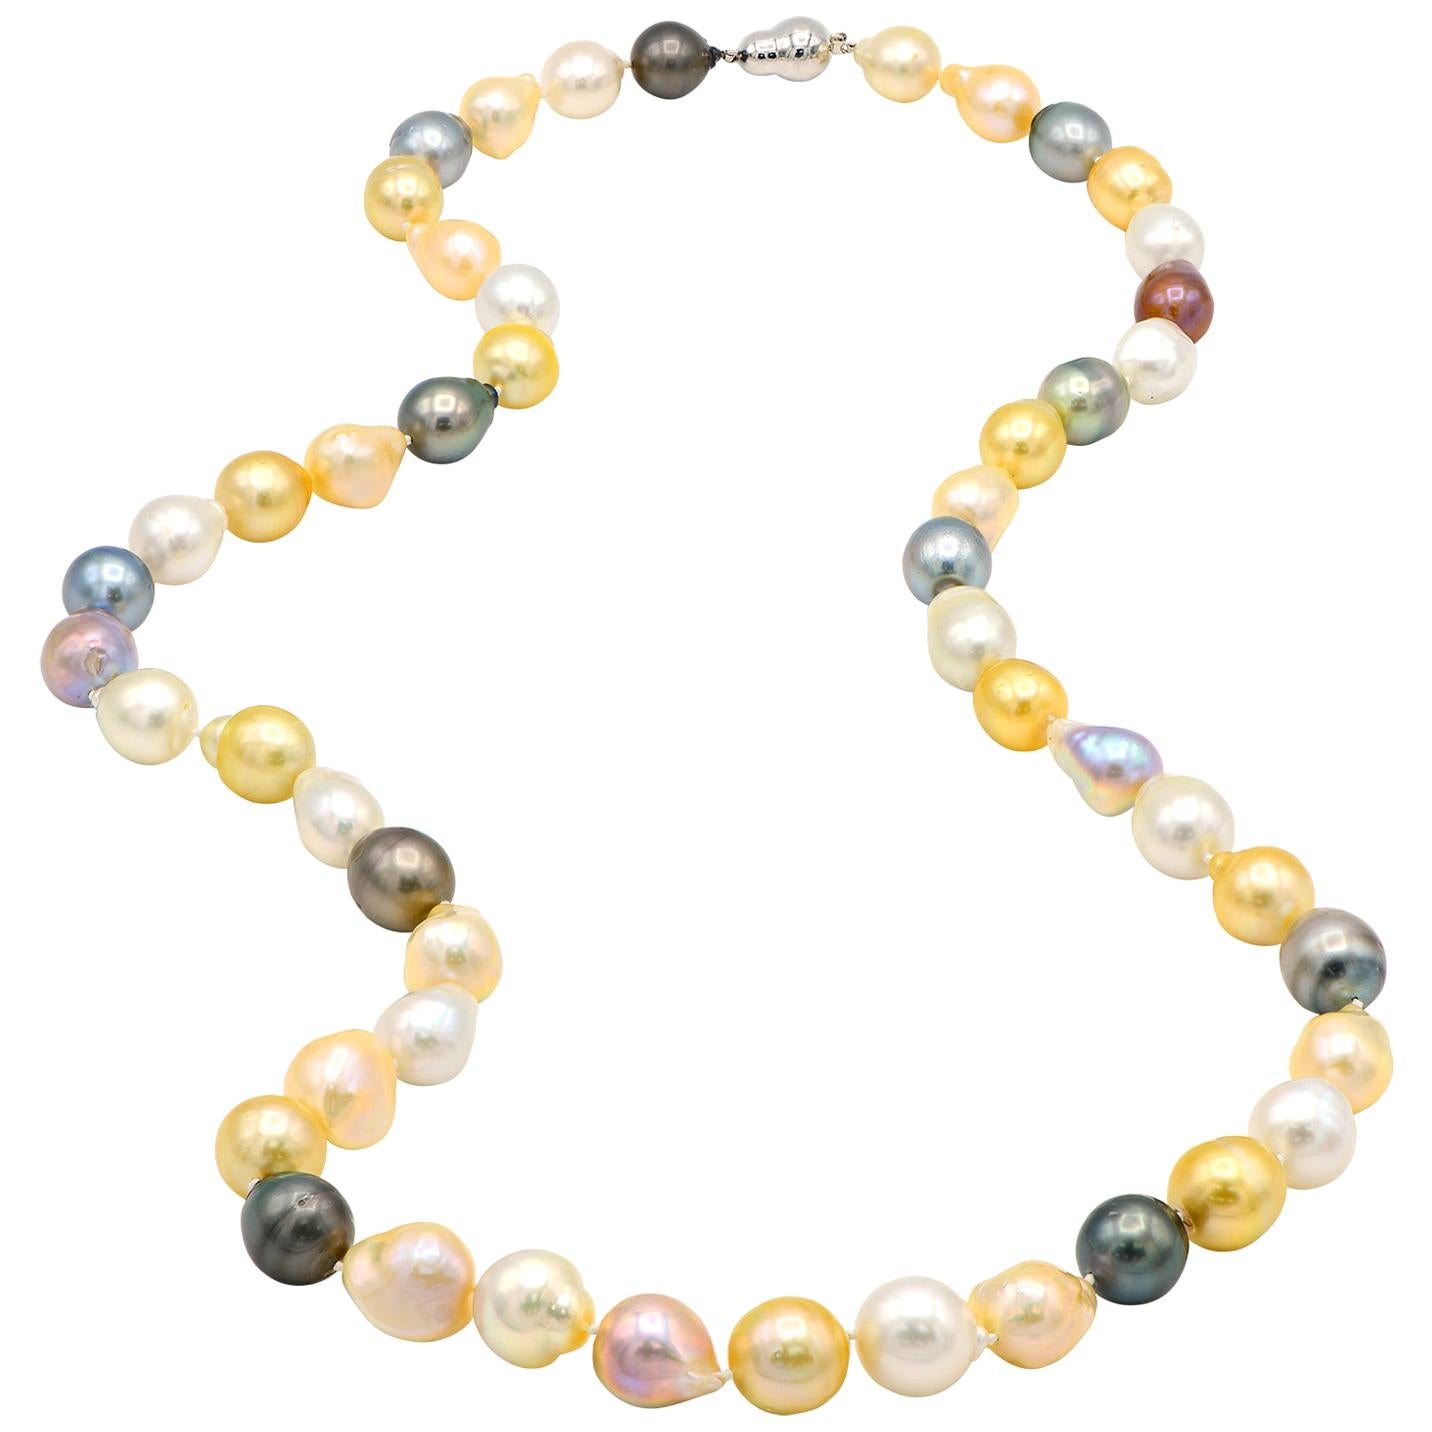 Pink Freshwater Pearl 5 Strand Necklace | Pearls.co.uk